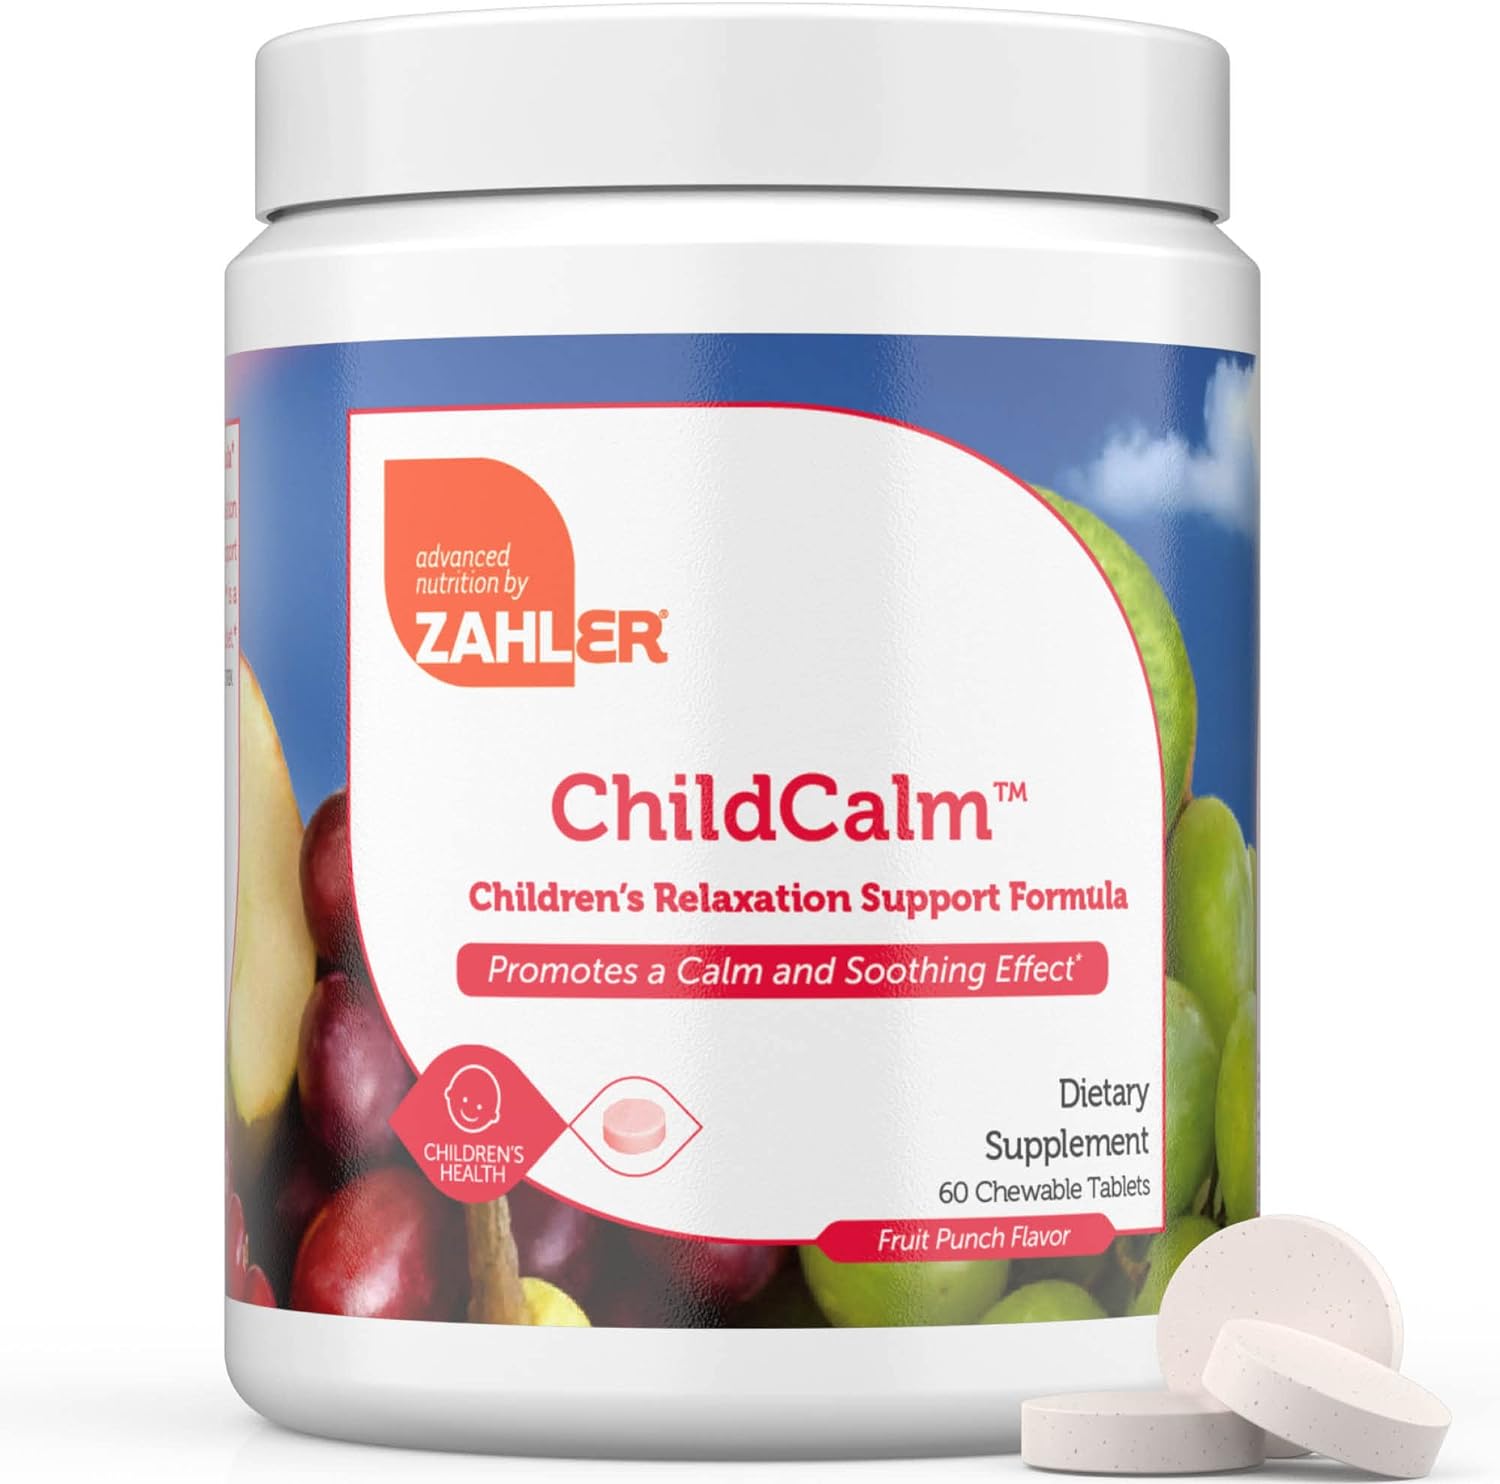 Zahler ChildCalm, Kosher Fruit Punch Chewable Magnesium for Kids - Natural Calm, Mood Support, and Relaxation - Calming Kids Magnesium Supplement Childrens Magnesium, 60 Tablets